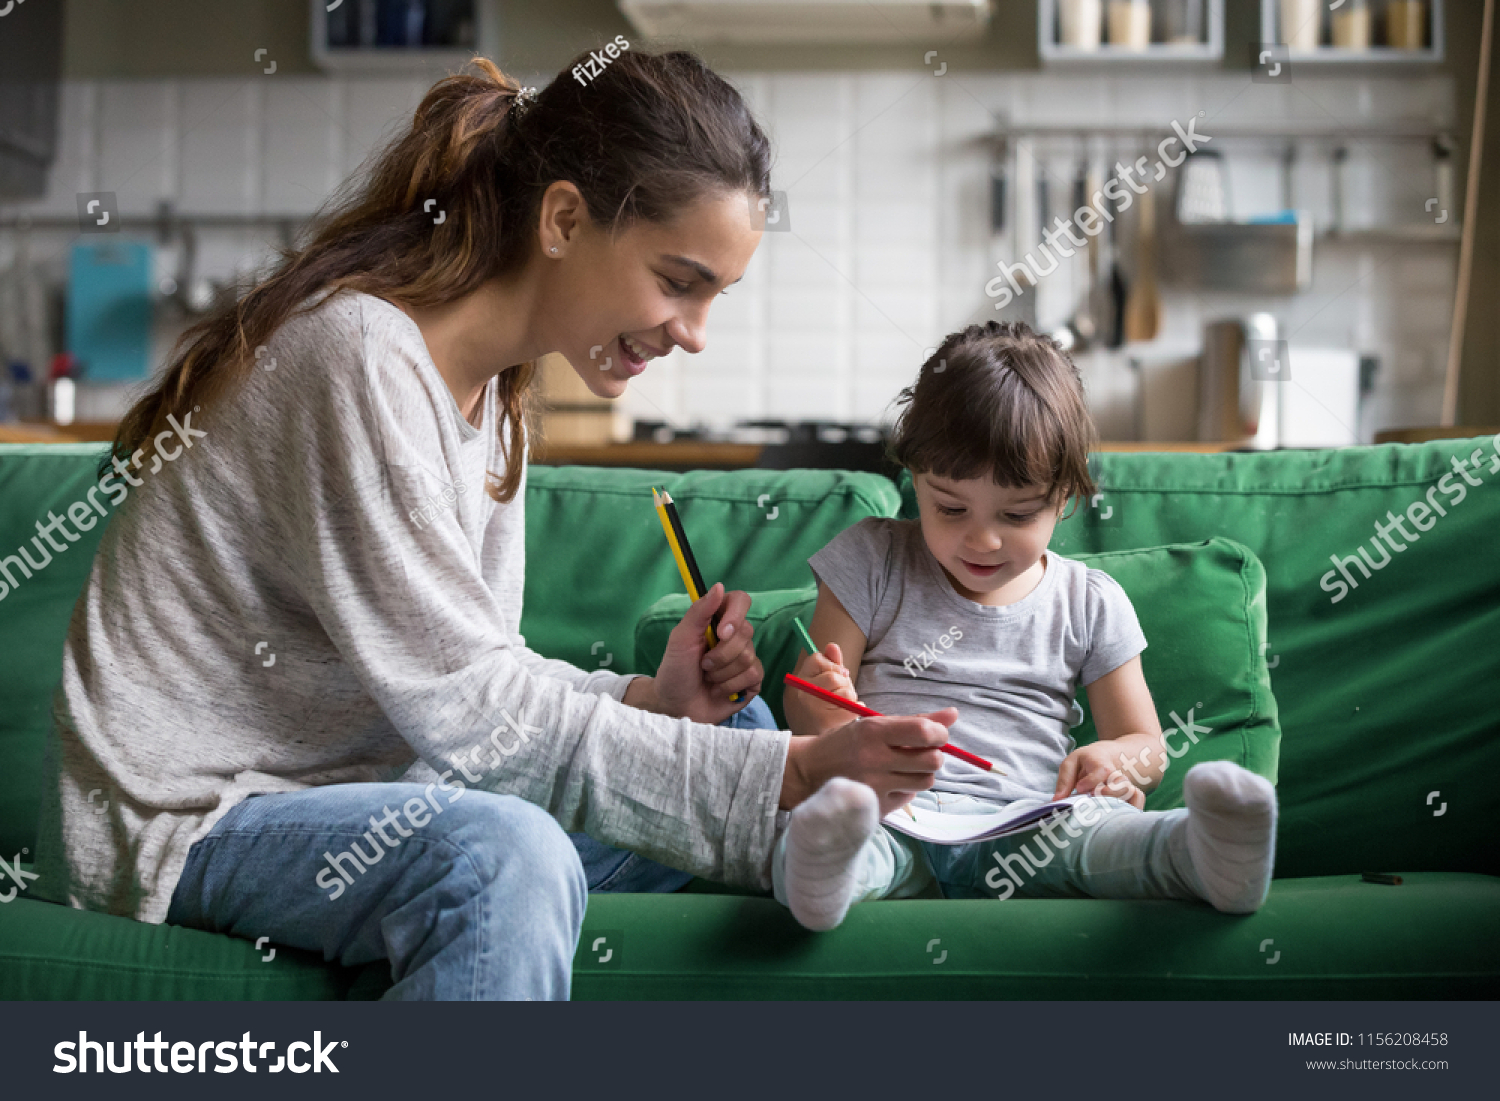 Smiling baby sitter and preschool kid girl drawing with colored pencils sitting on sofa together, single mother and child daughter playing having fun, creative family activities at home concept #1156208458